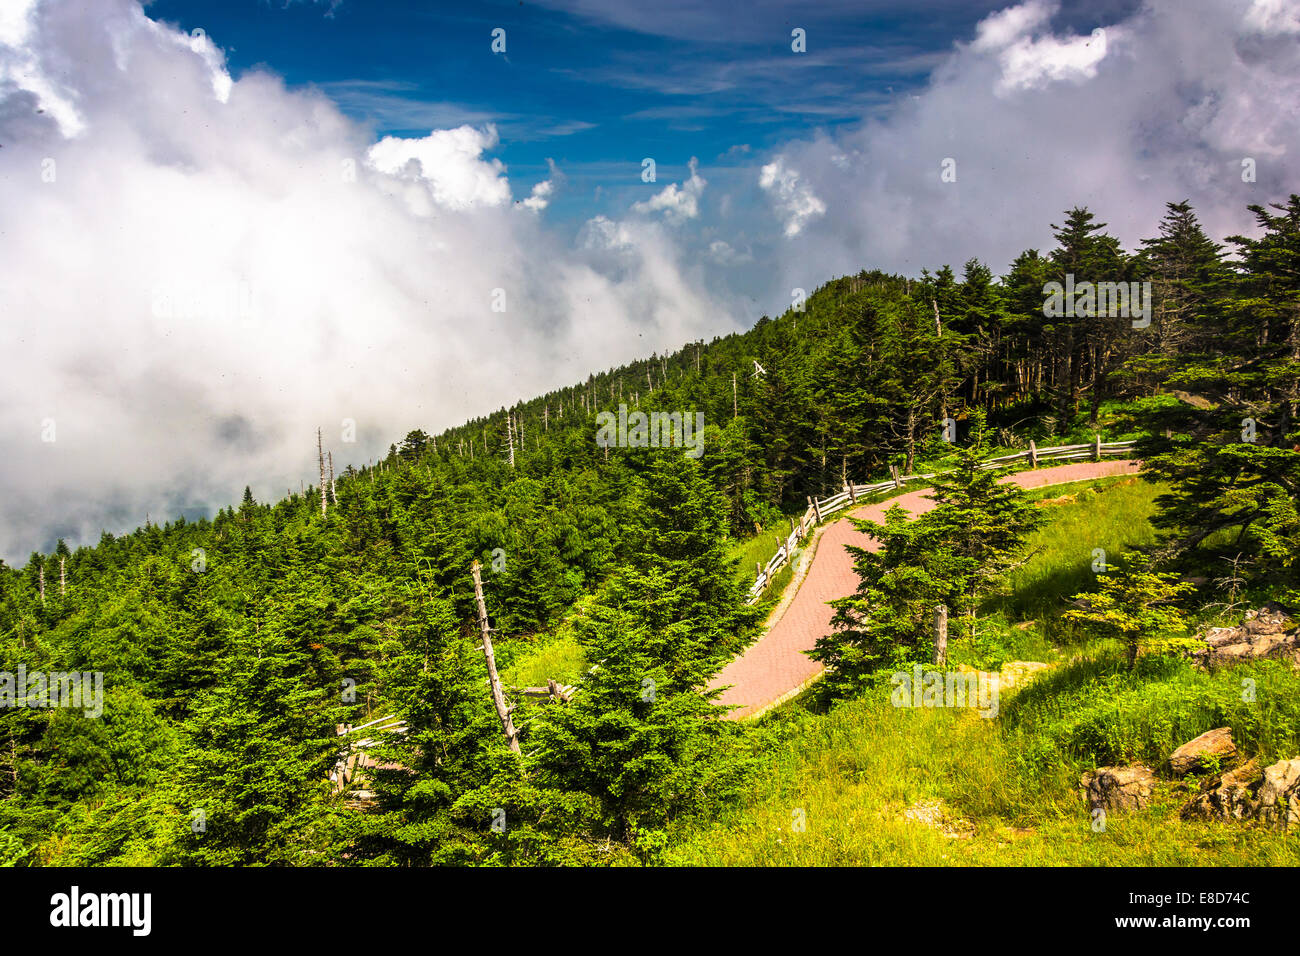 View from the Observation Tower at Mount Mitchell, North Carolina. Stock Photo